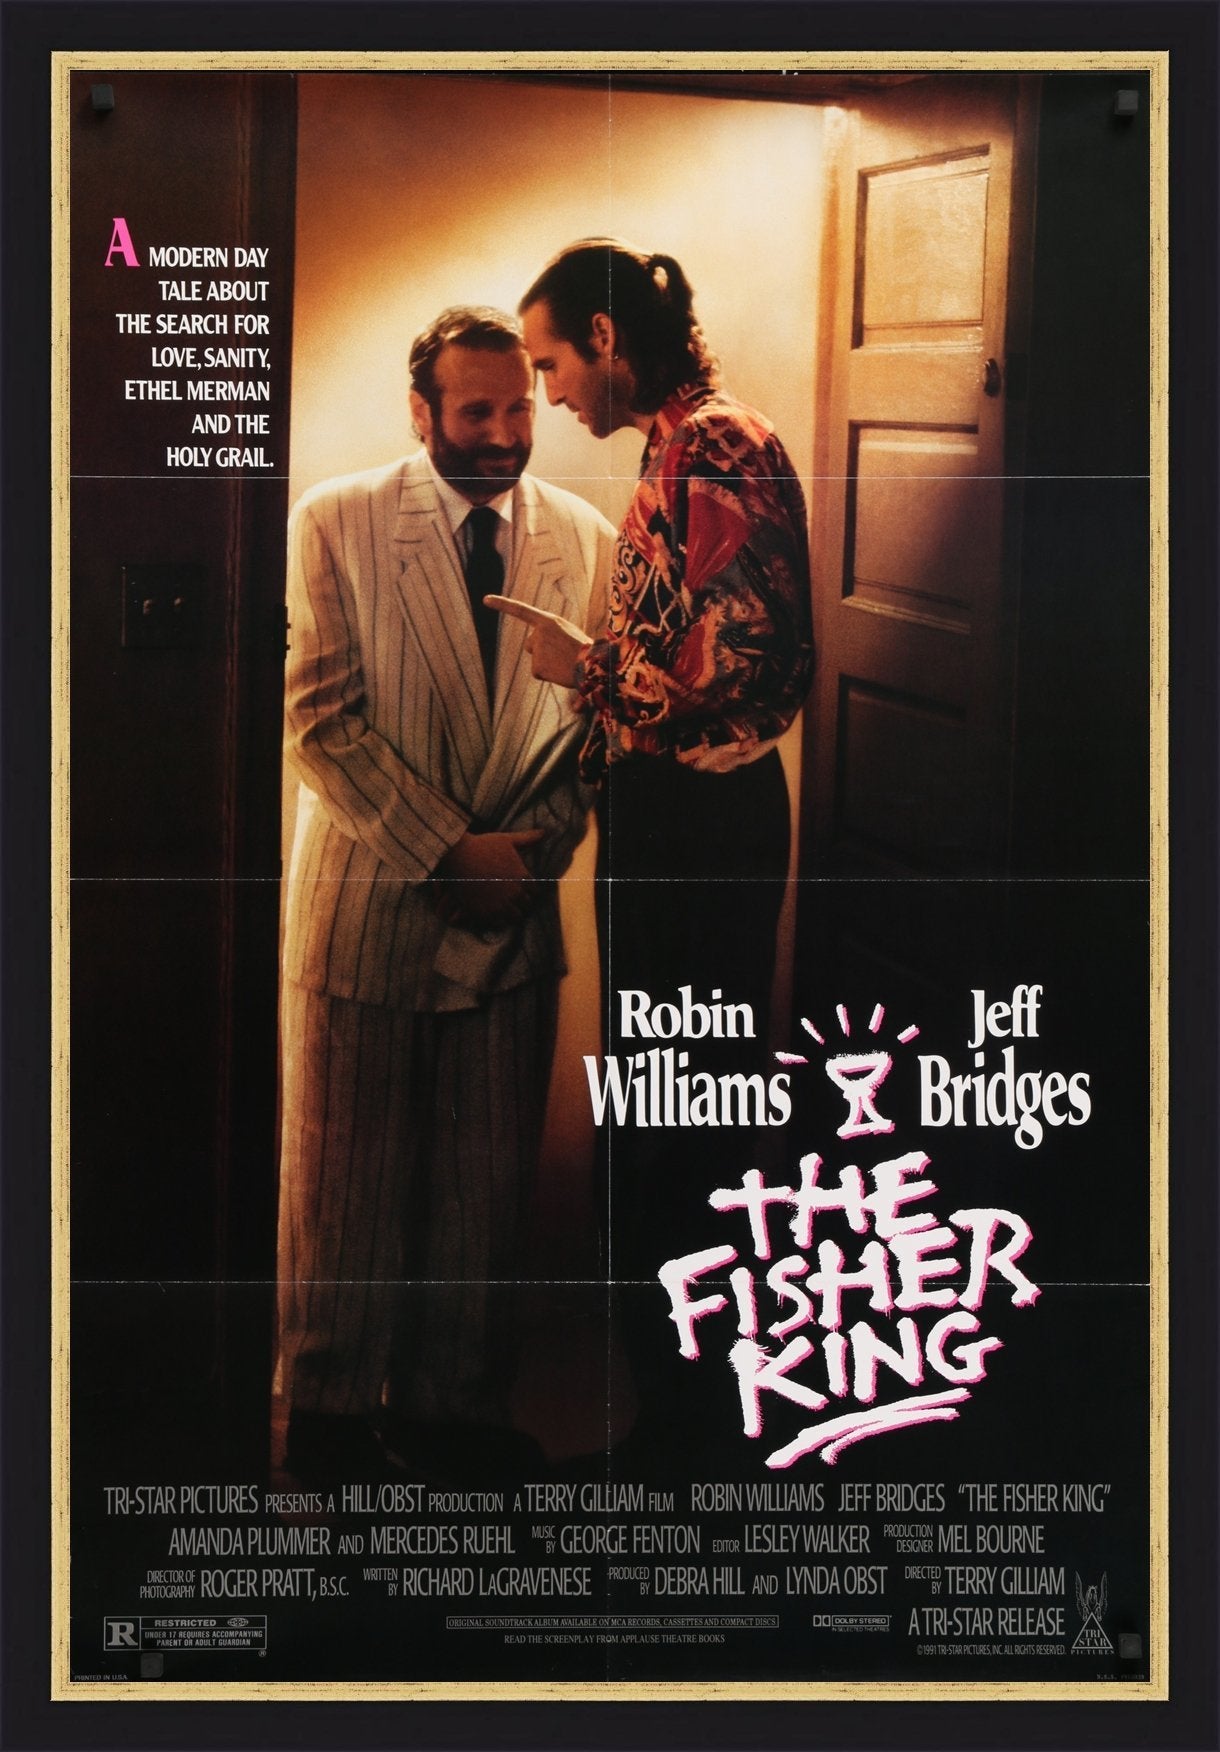 An original movie poster for the film The Fisher King